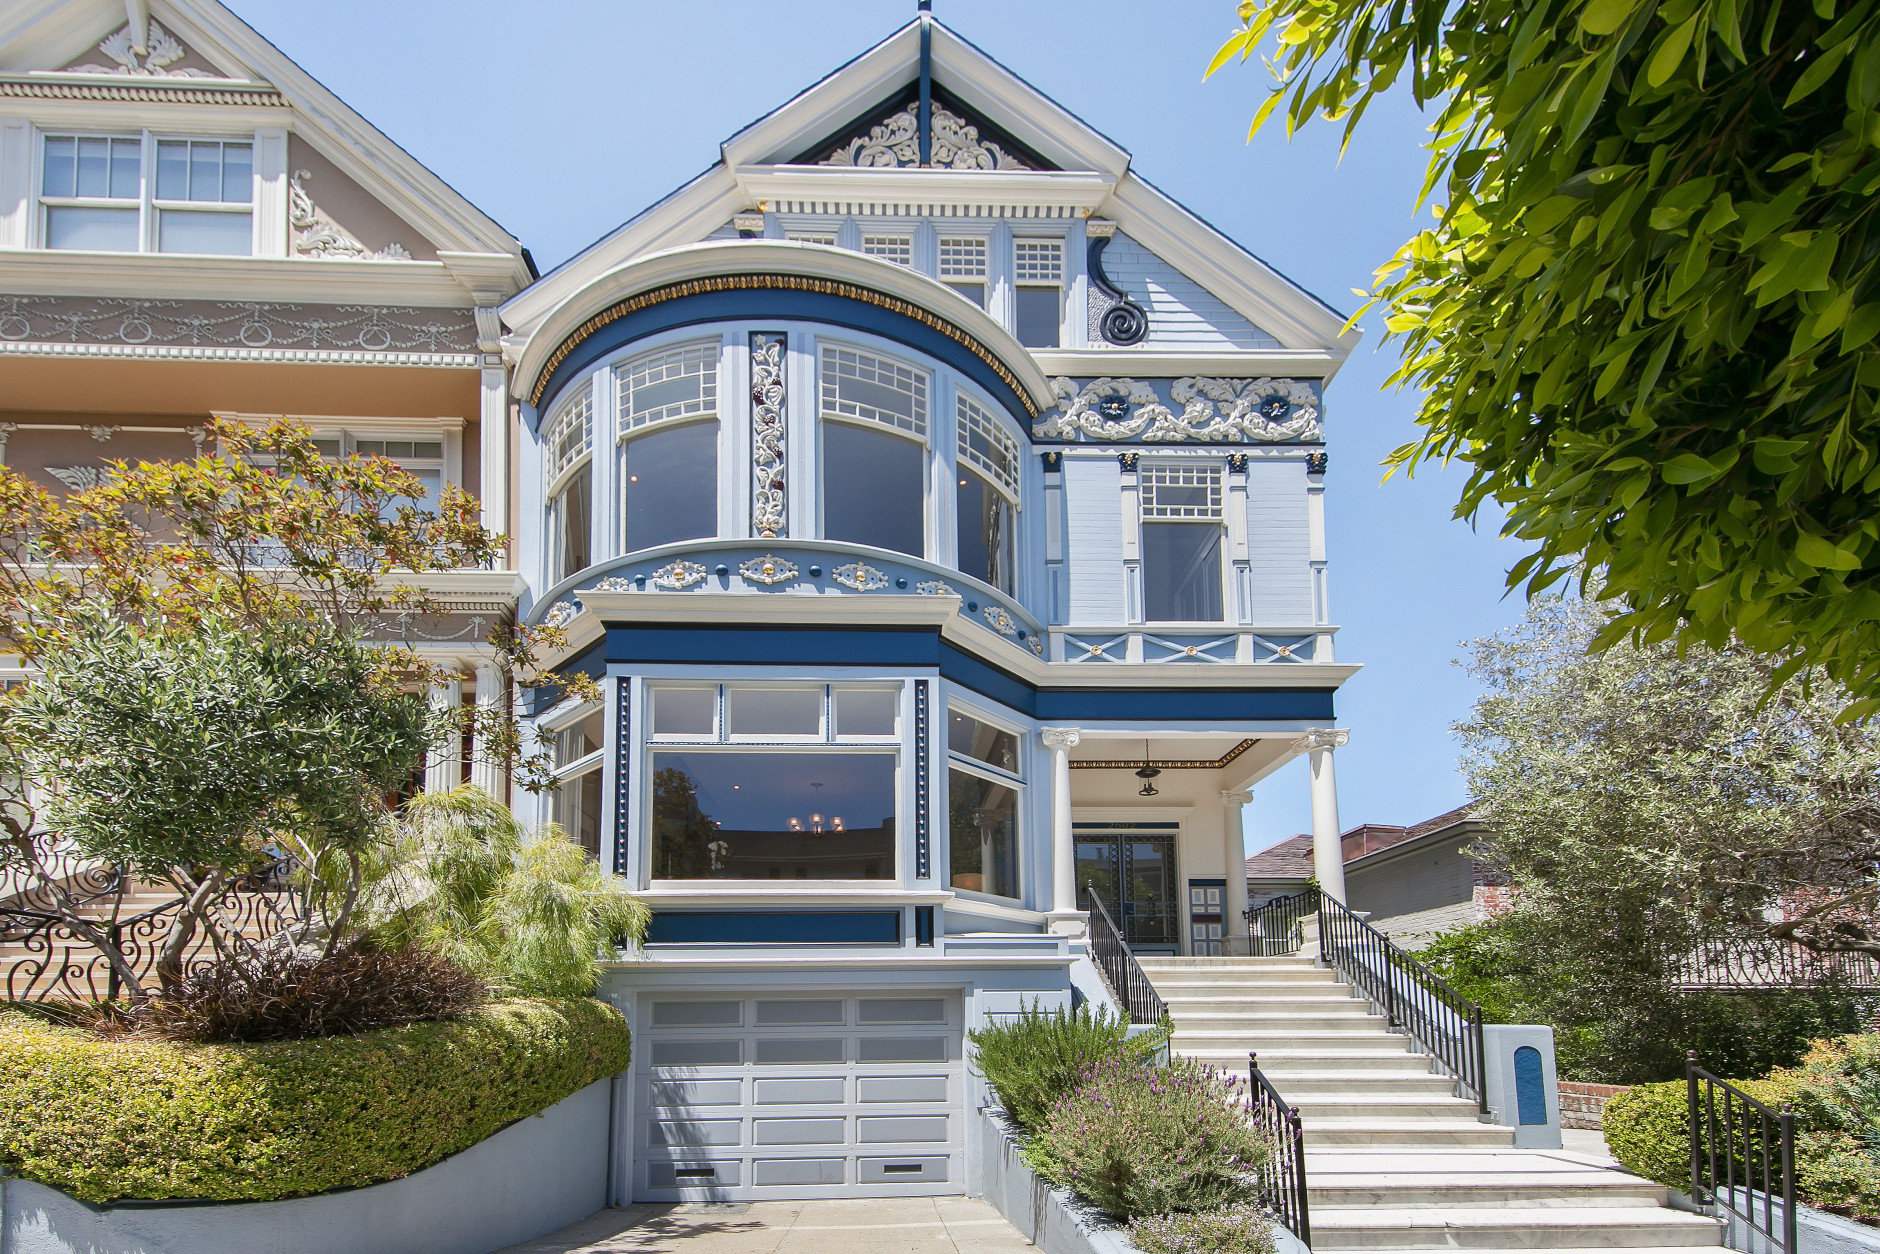 Romantic comedy queen Meg Ryan’s San Francisco six-bedroom home that she shared with actor Dennis Quaid is up for sale and priced at nearly $9 million. (Jason Wakefield/TopTenRealEstate)